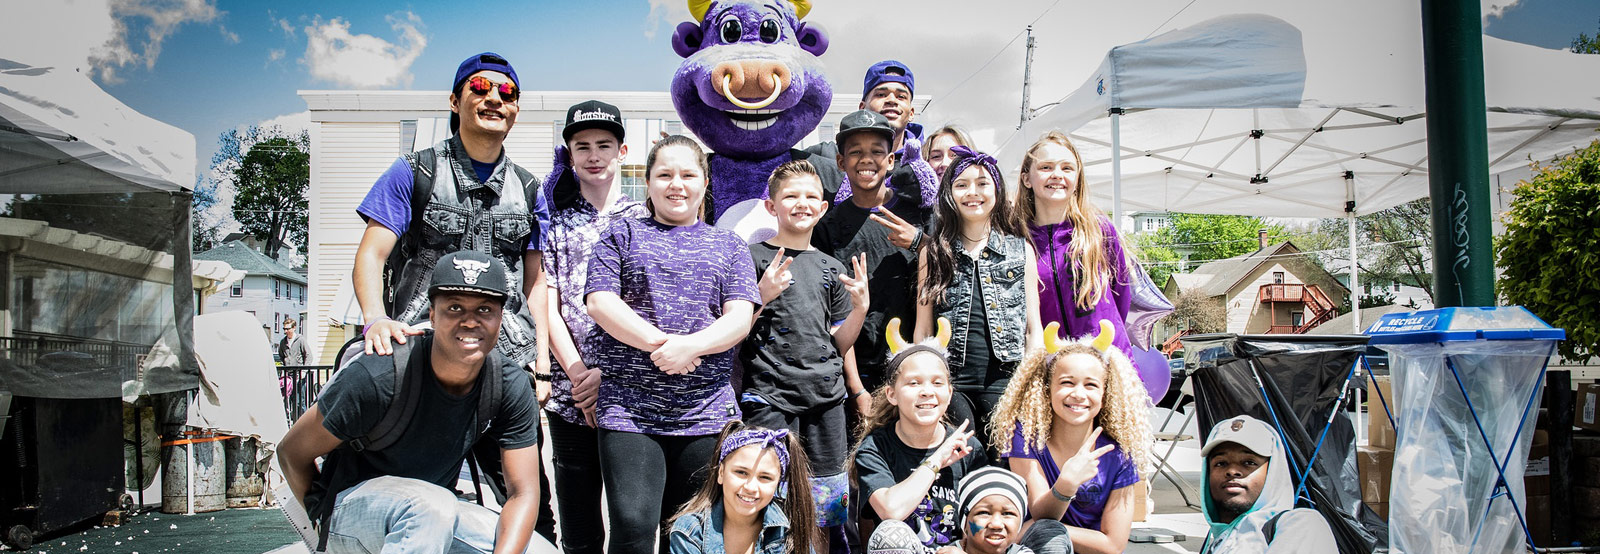 Photo showing Pete the Purple Bull with members of Reflex Dance and school kids from the Quad Cities